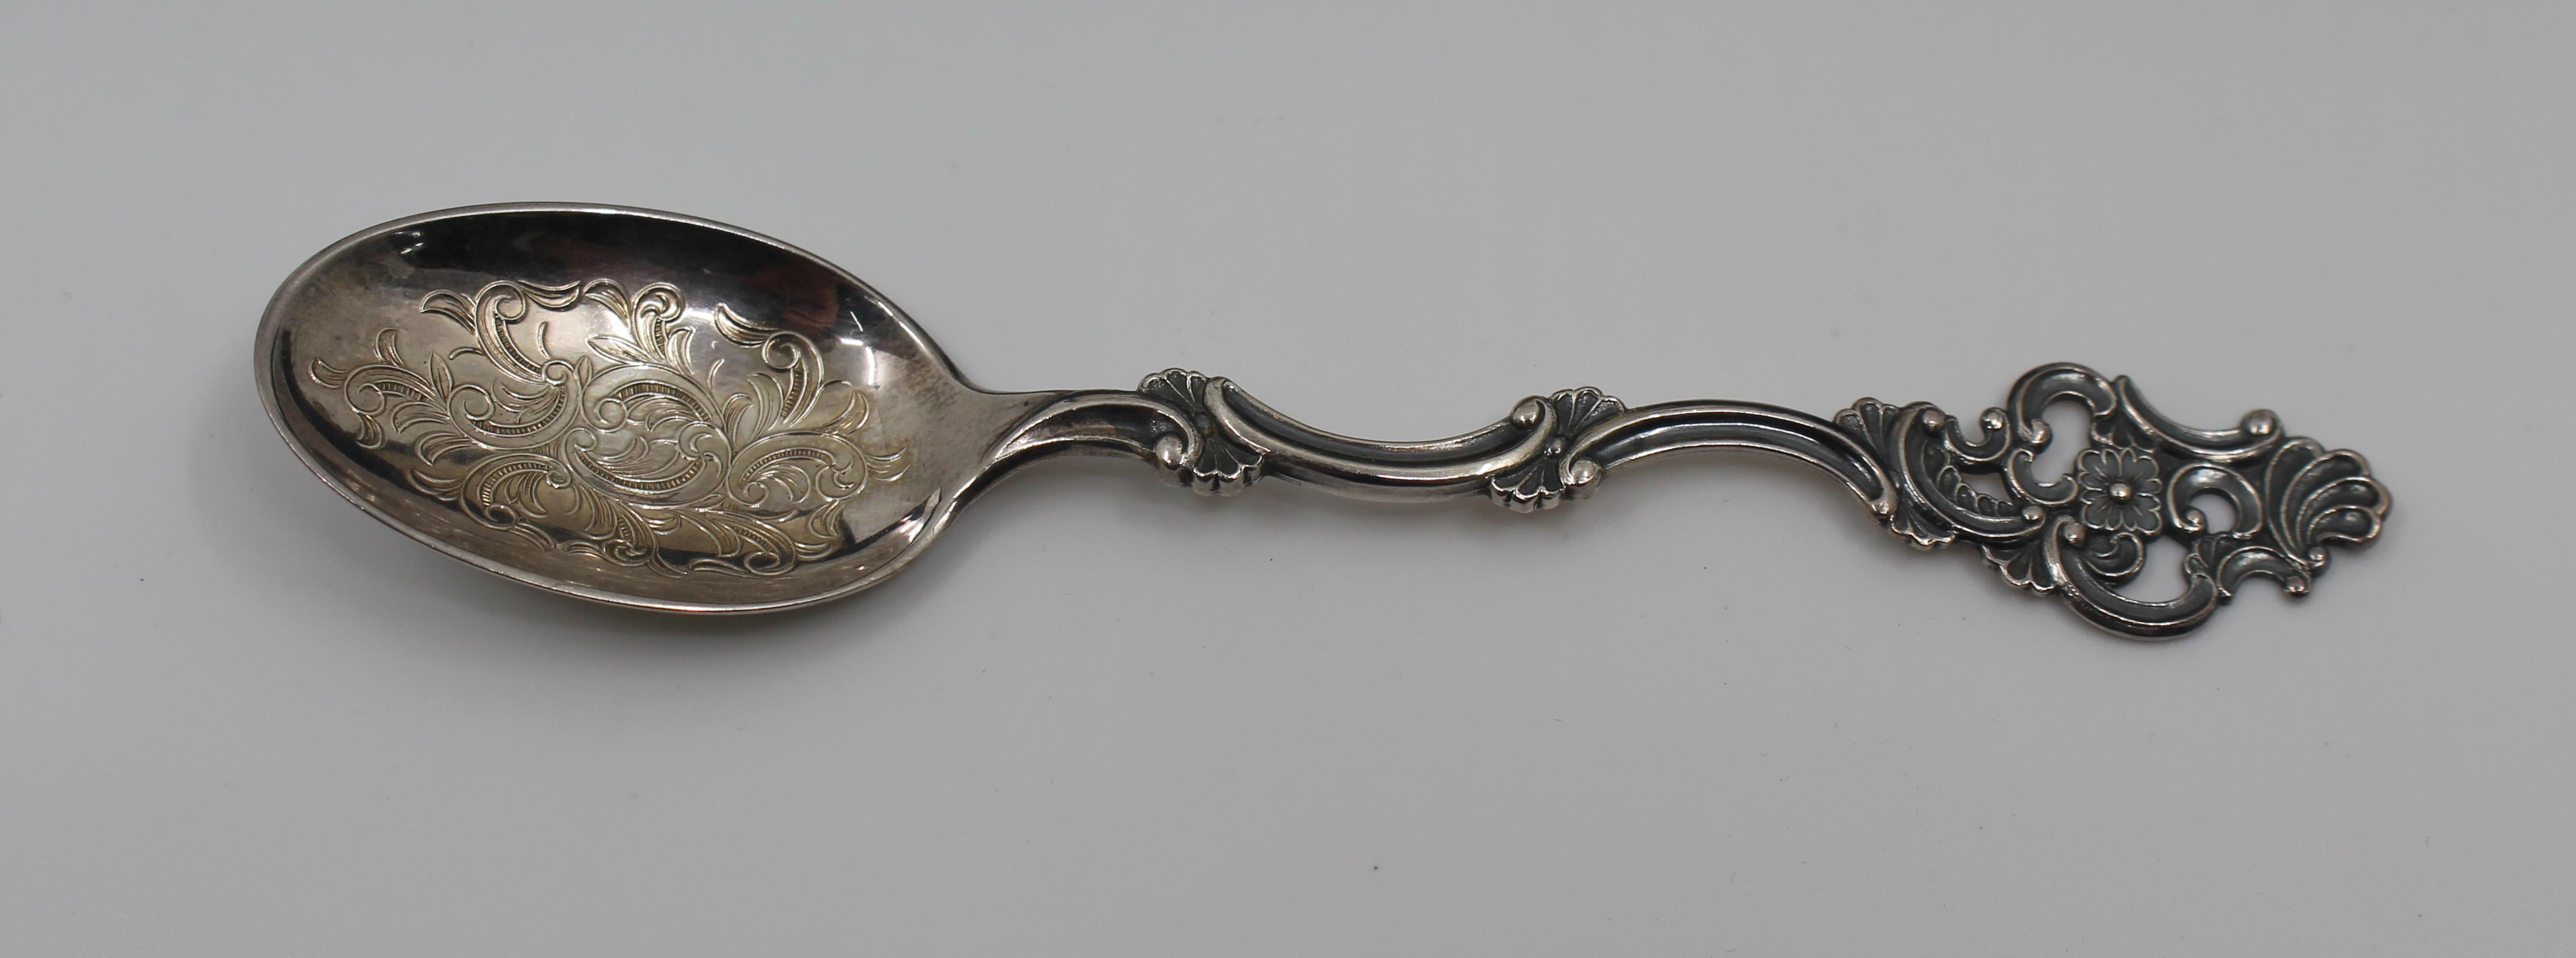 20th Century Early 20th c. Norwegian Silver Spoons by Thorvald Marthinsen Sølvvarefabrik For Sale